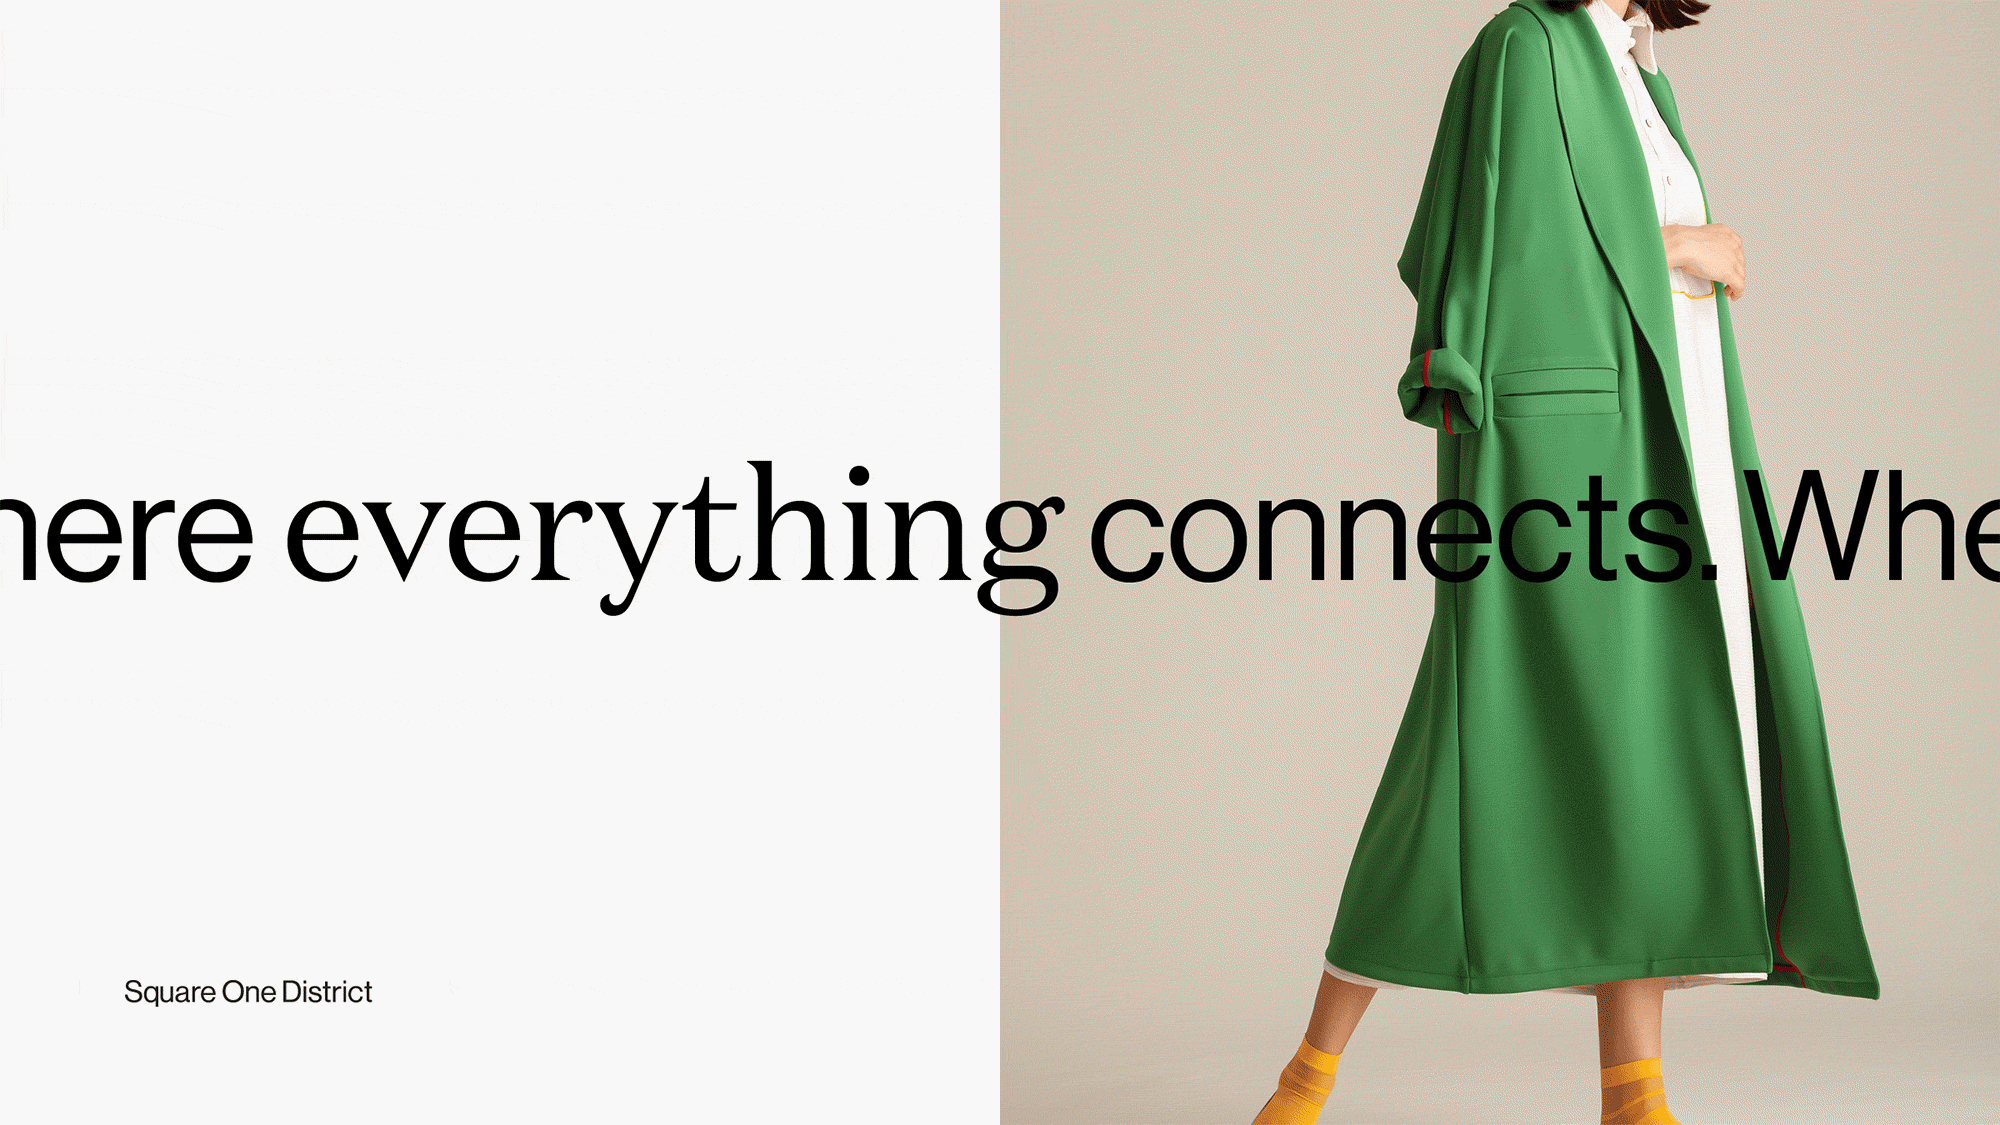 VB_SquareOneDistrict-WhereEverythingConnects-alt